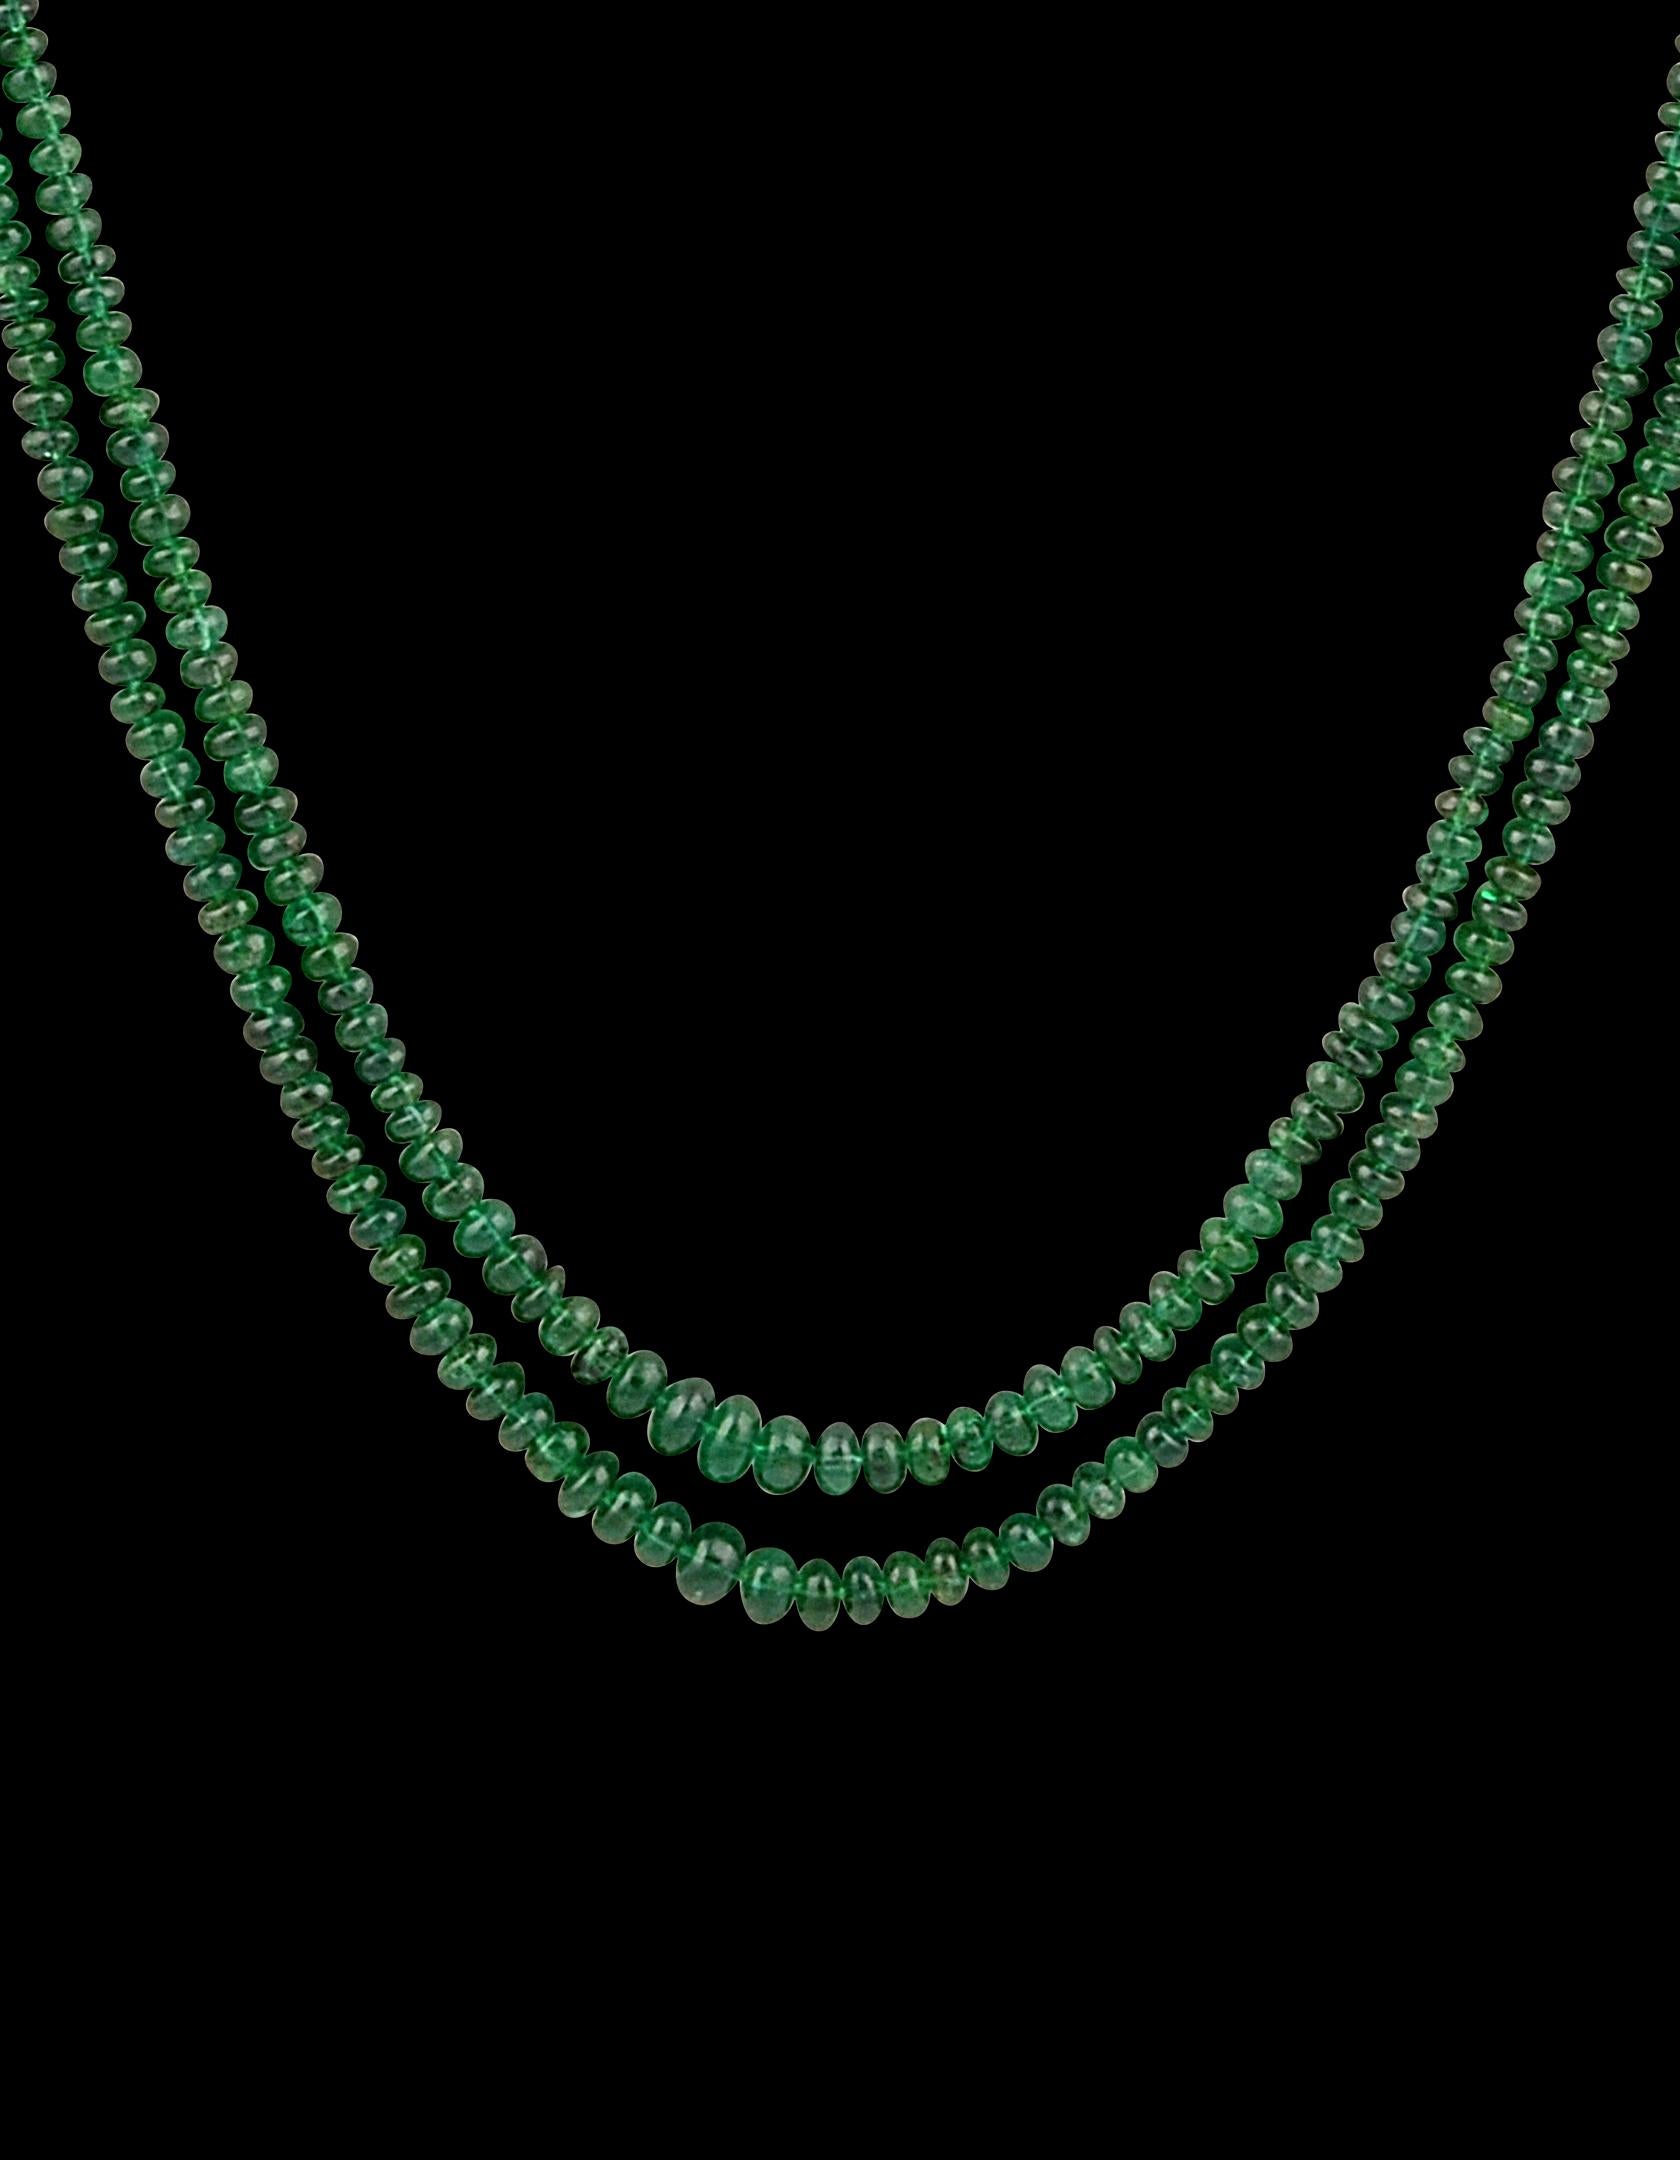 125ct Fine Emerald Beads 2 Line Necklace with 14 Kt Yellow Gold Clasp Adjustable 12